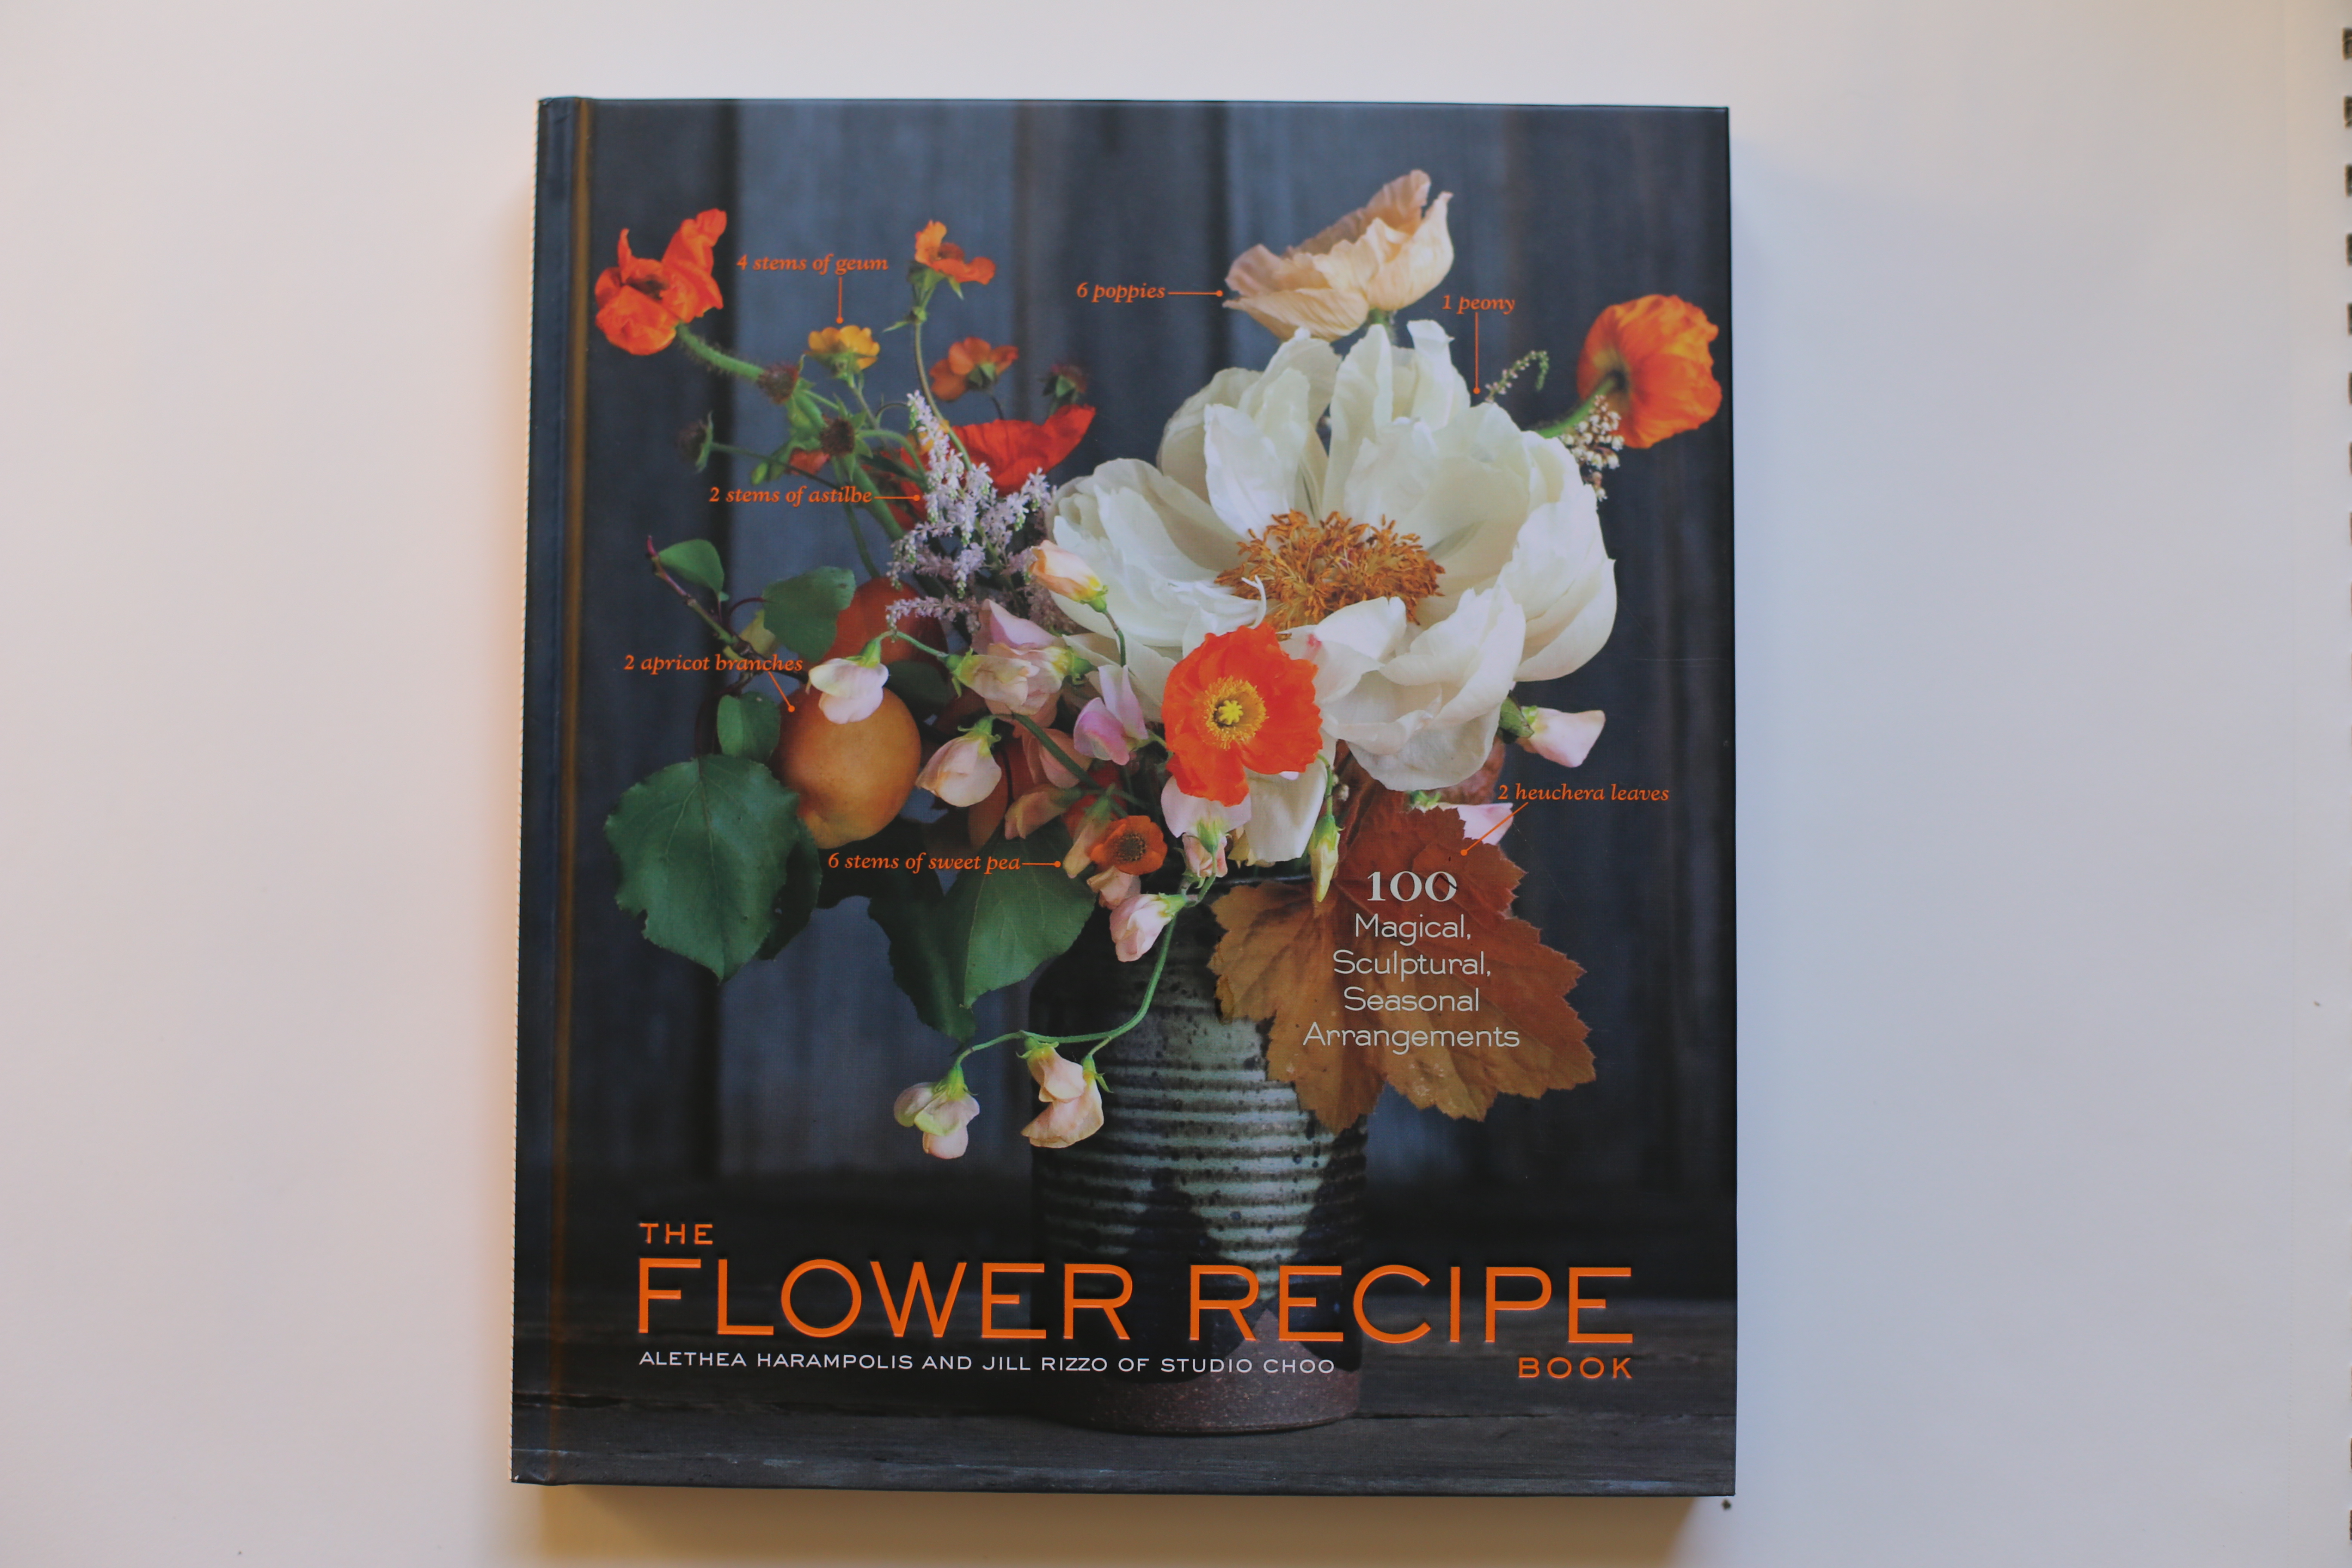 The Flower Recipe Book Giveaway Floret Flowers Images, Photos, Reviews